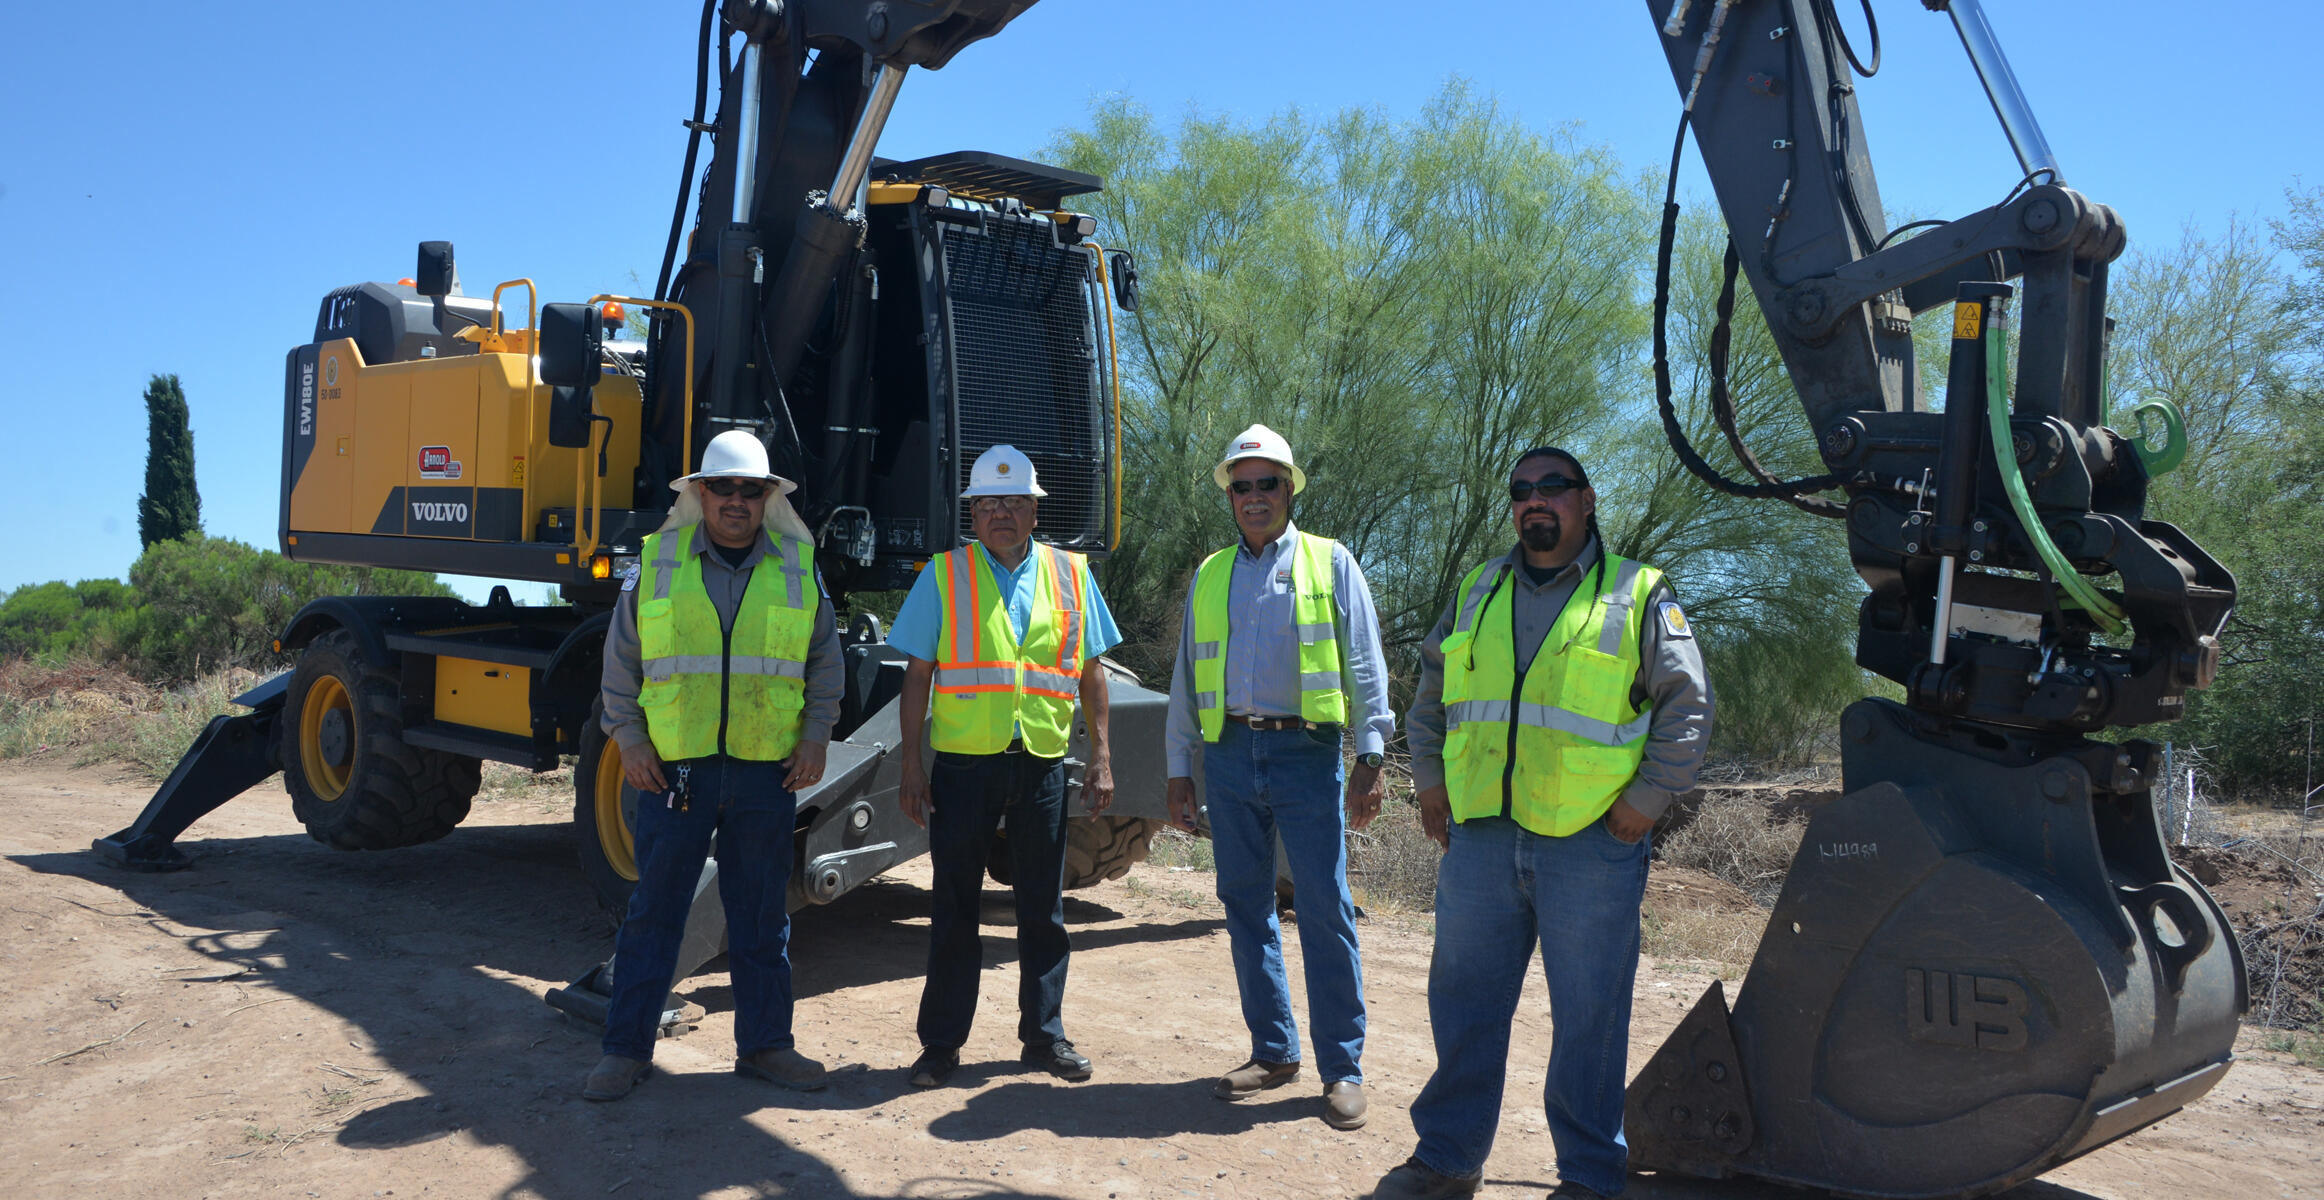 Workers at Salt River PIMA-MARICOPA Indian Community using a Volvo EW180E wheeled excavator